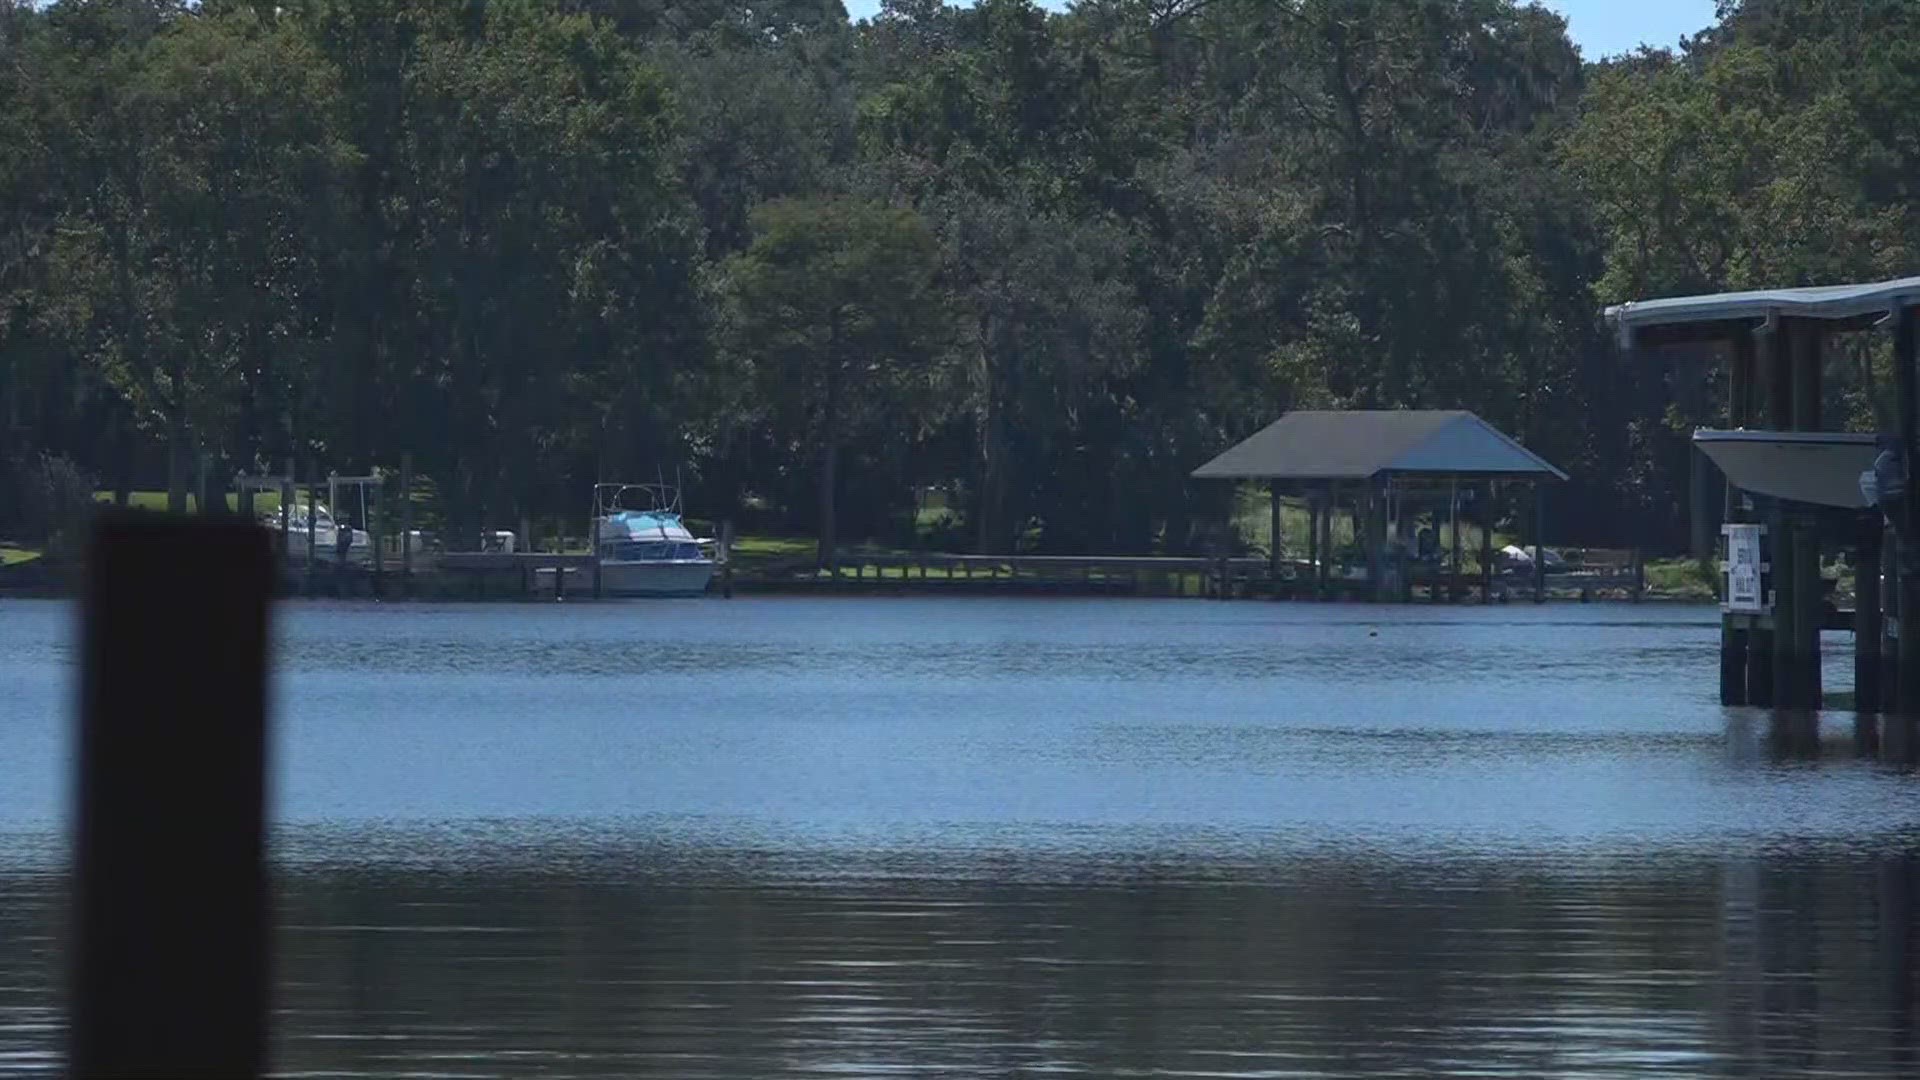 A man was found dead in the lake by Lake Shore Boulevard. A witness reported the discovery.